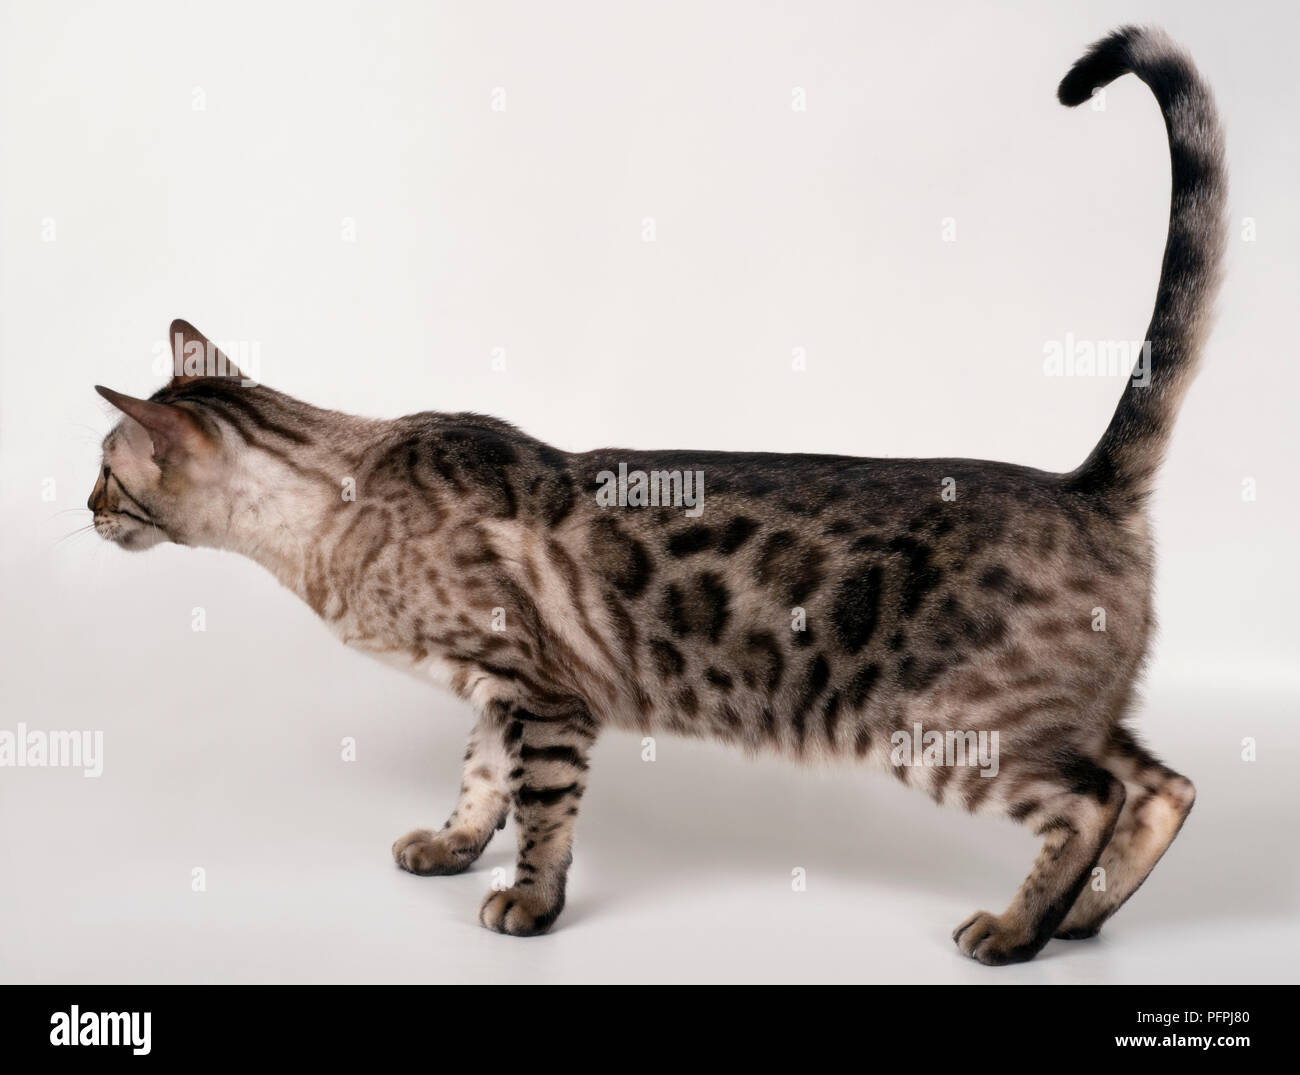 Brown rosetted Bengal cat, standing, side view Stock Photo